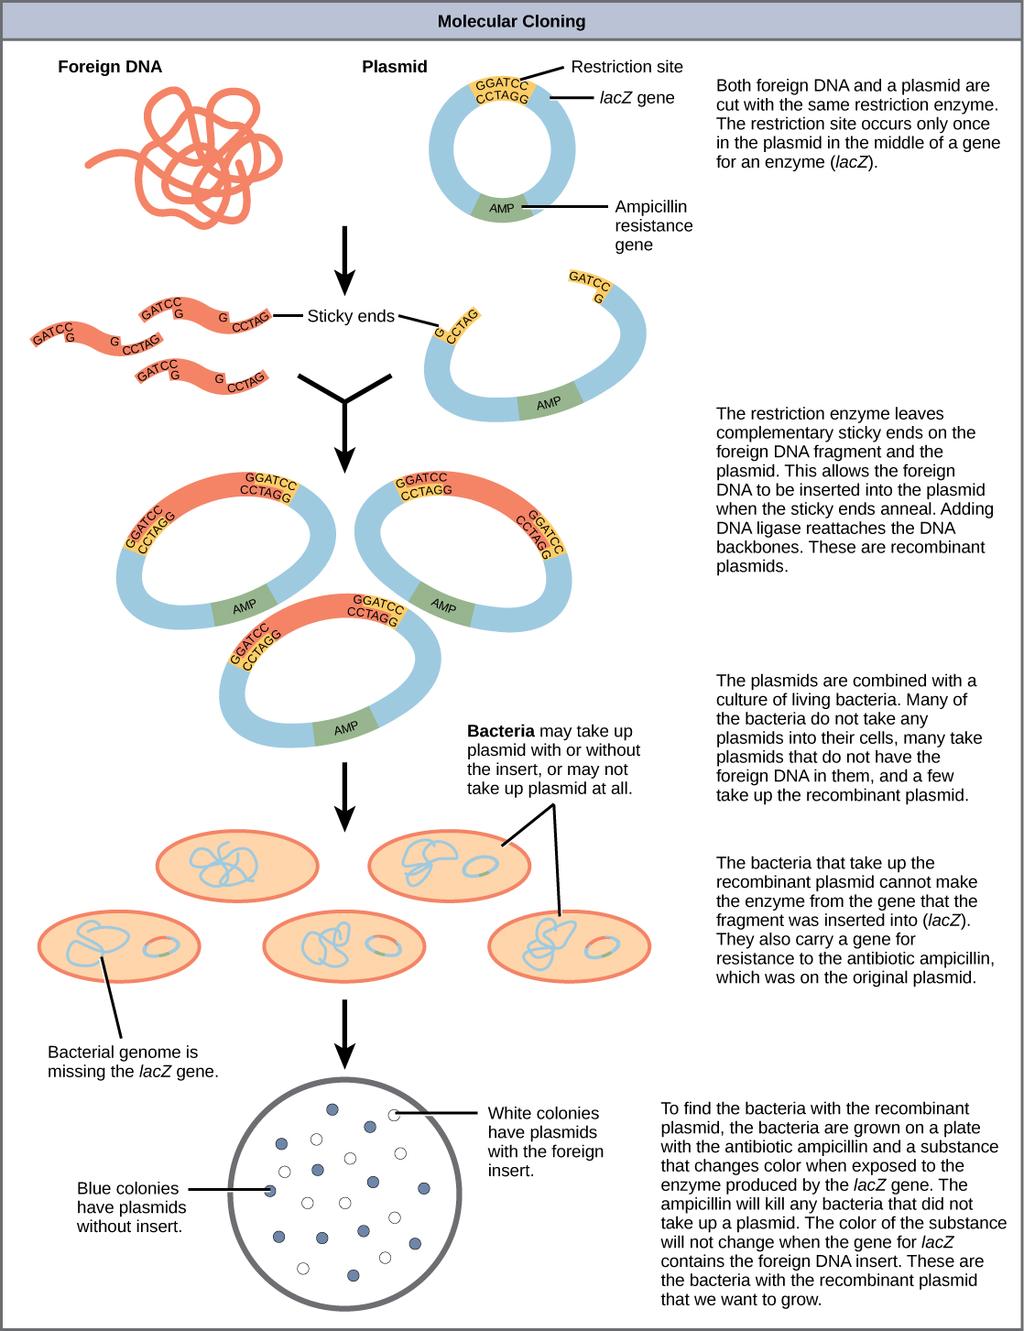 This diagram shows the steps involved in molecular cloning. Plasmids with foreign DNA inserted into them are called recombinant DNA molecules because they contain new combinations of genetic material.